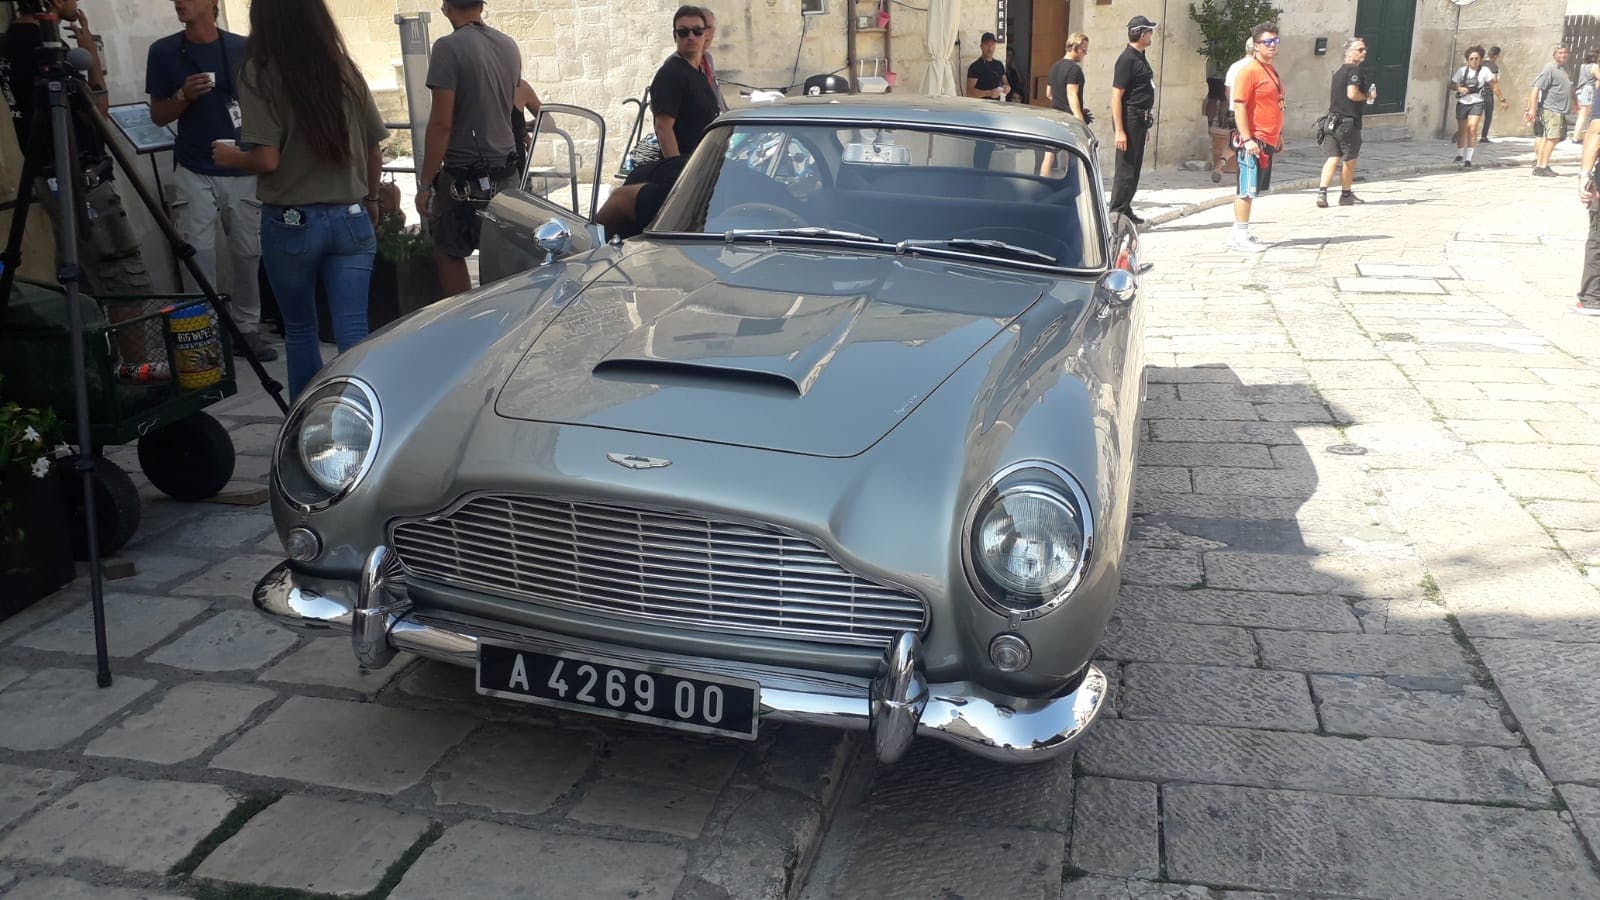 007 Special mission guided tour in Matera Musement